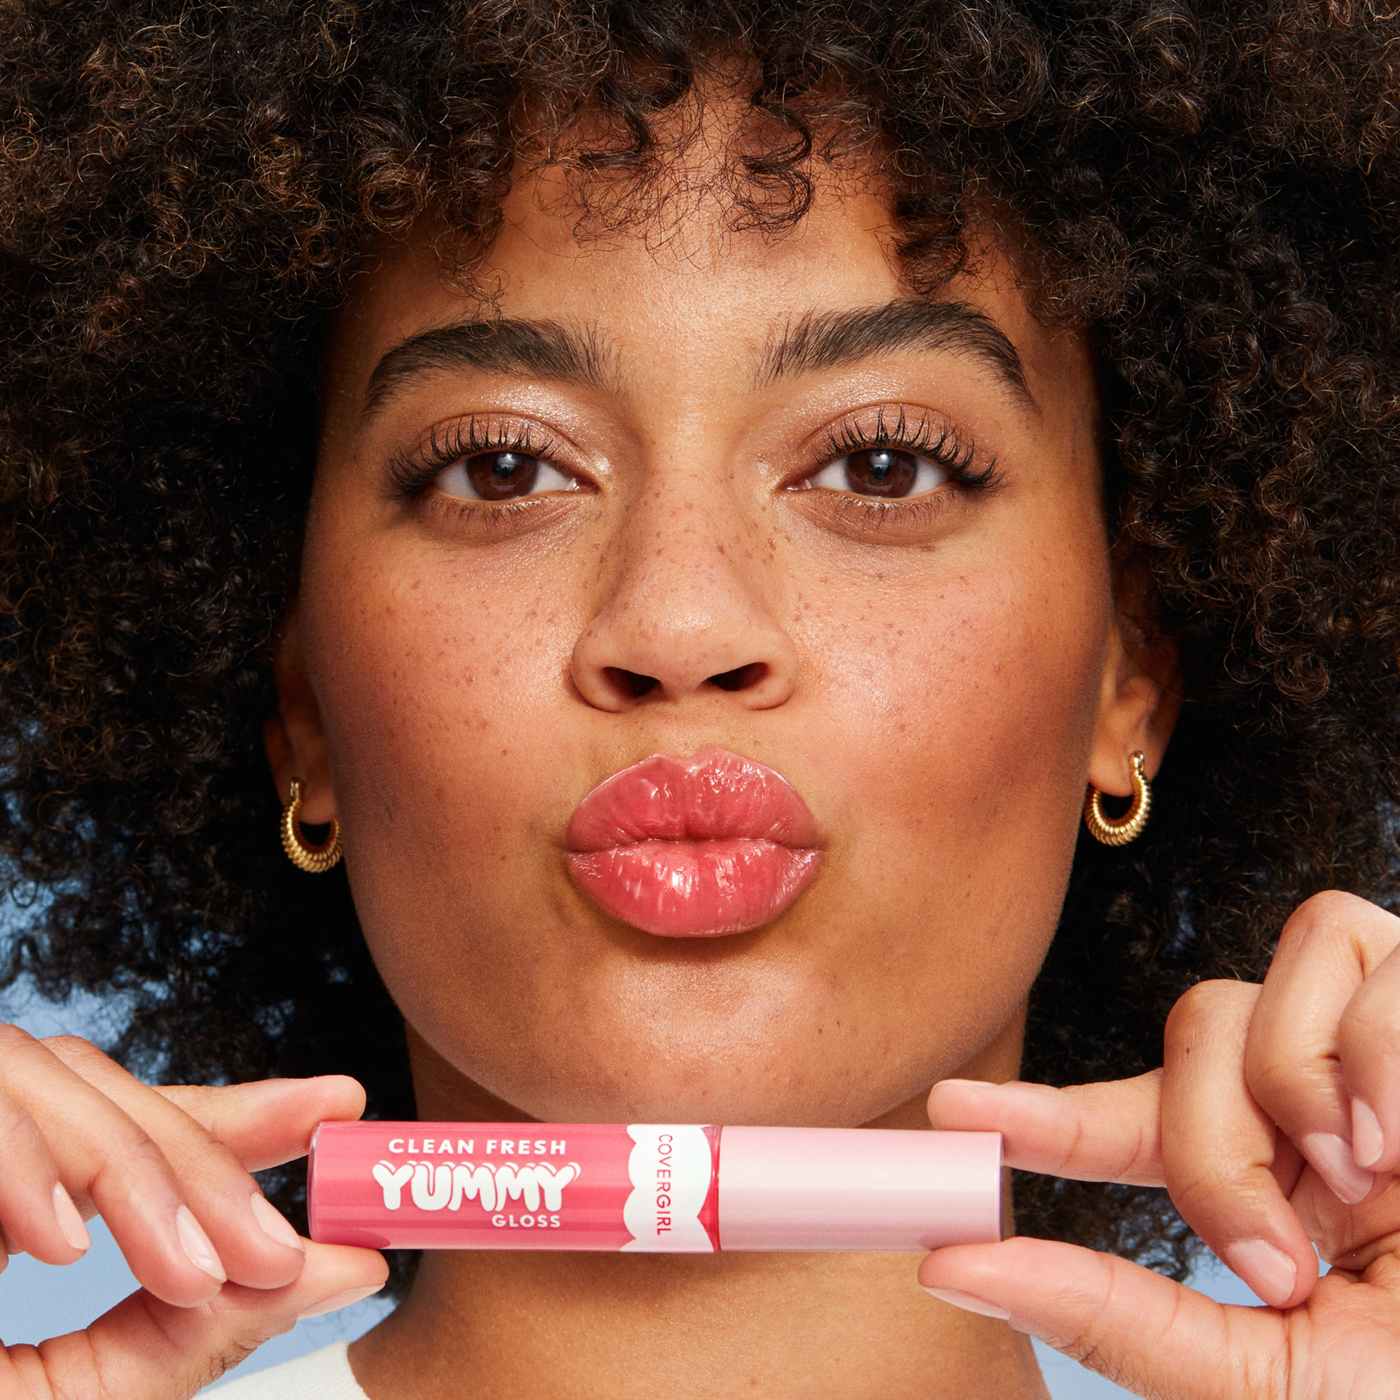 Covergirl Clean Fresh Yummy Lip Gloss - Coconuts About You; image 5 of 10